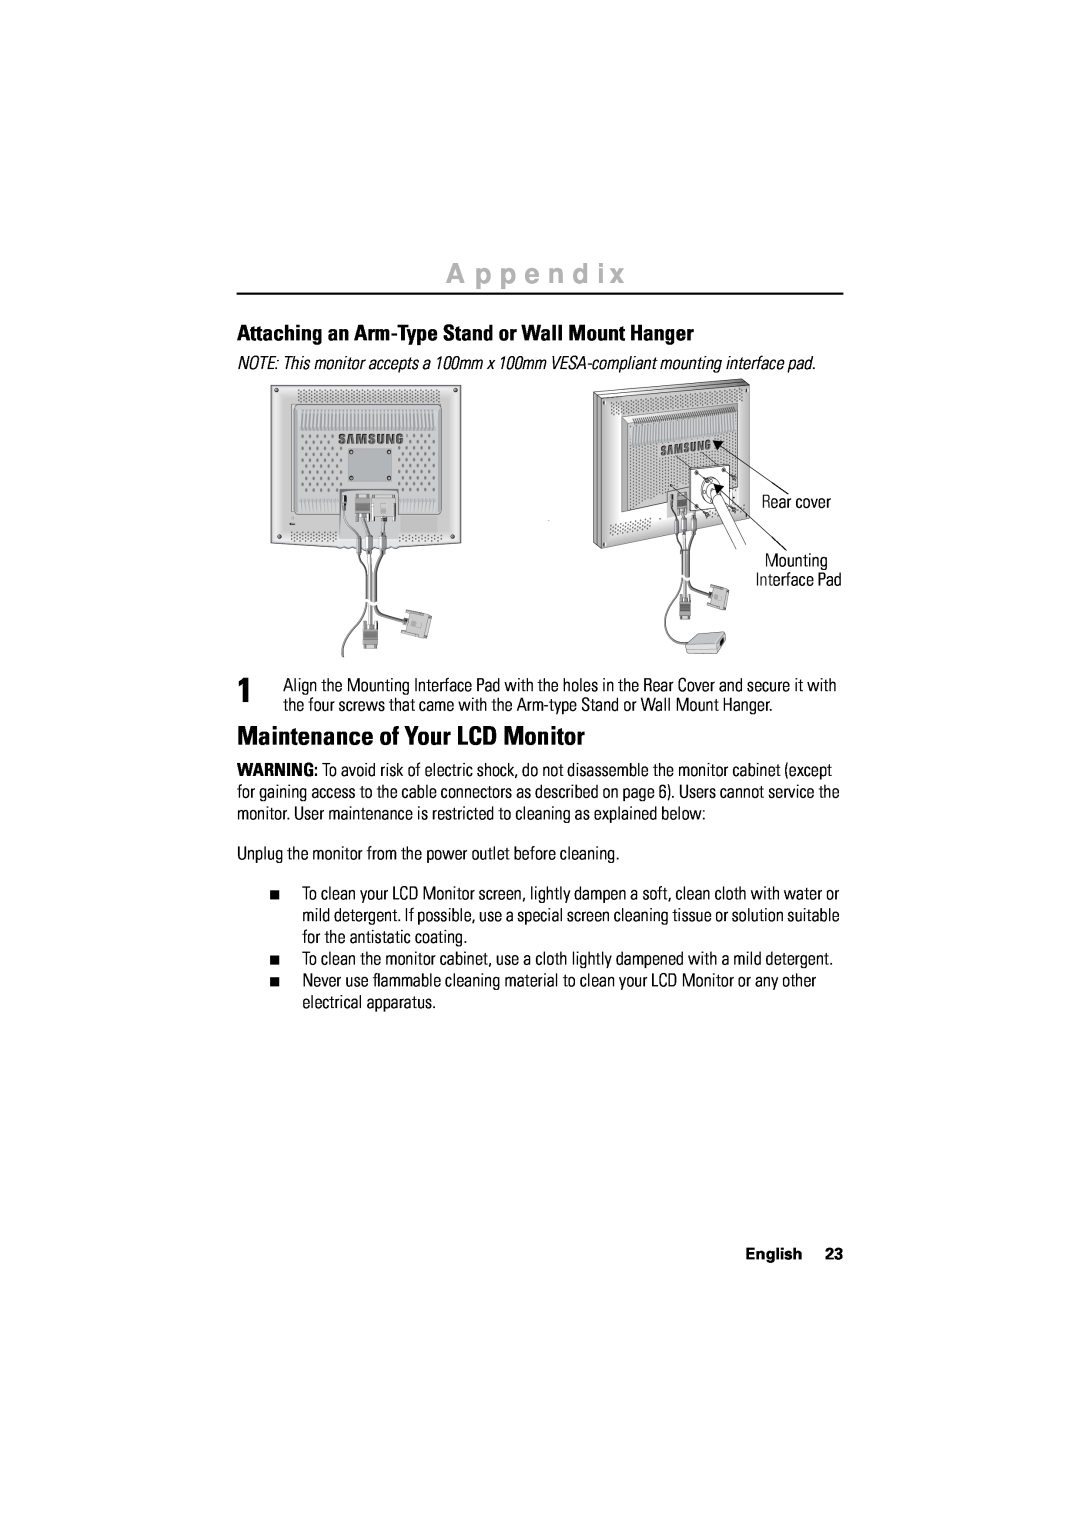 Samsung 170T manual Maintenance of Your LCD Monitor, Attaching an Arm-Type Stand or Wall Mount Hanger, English, Appendix 